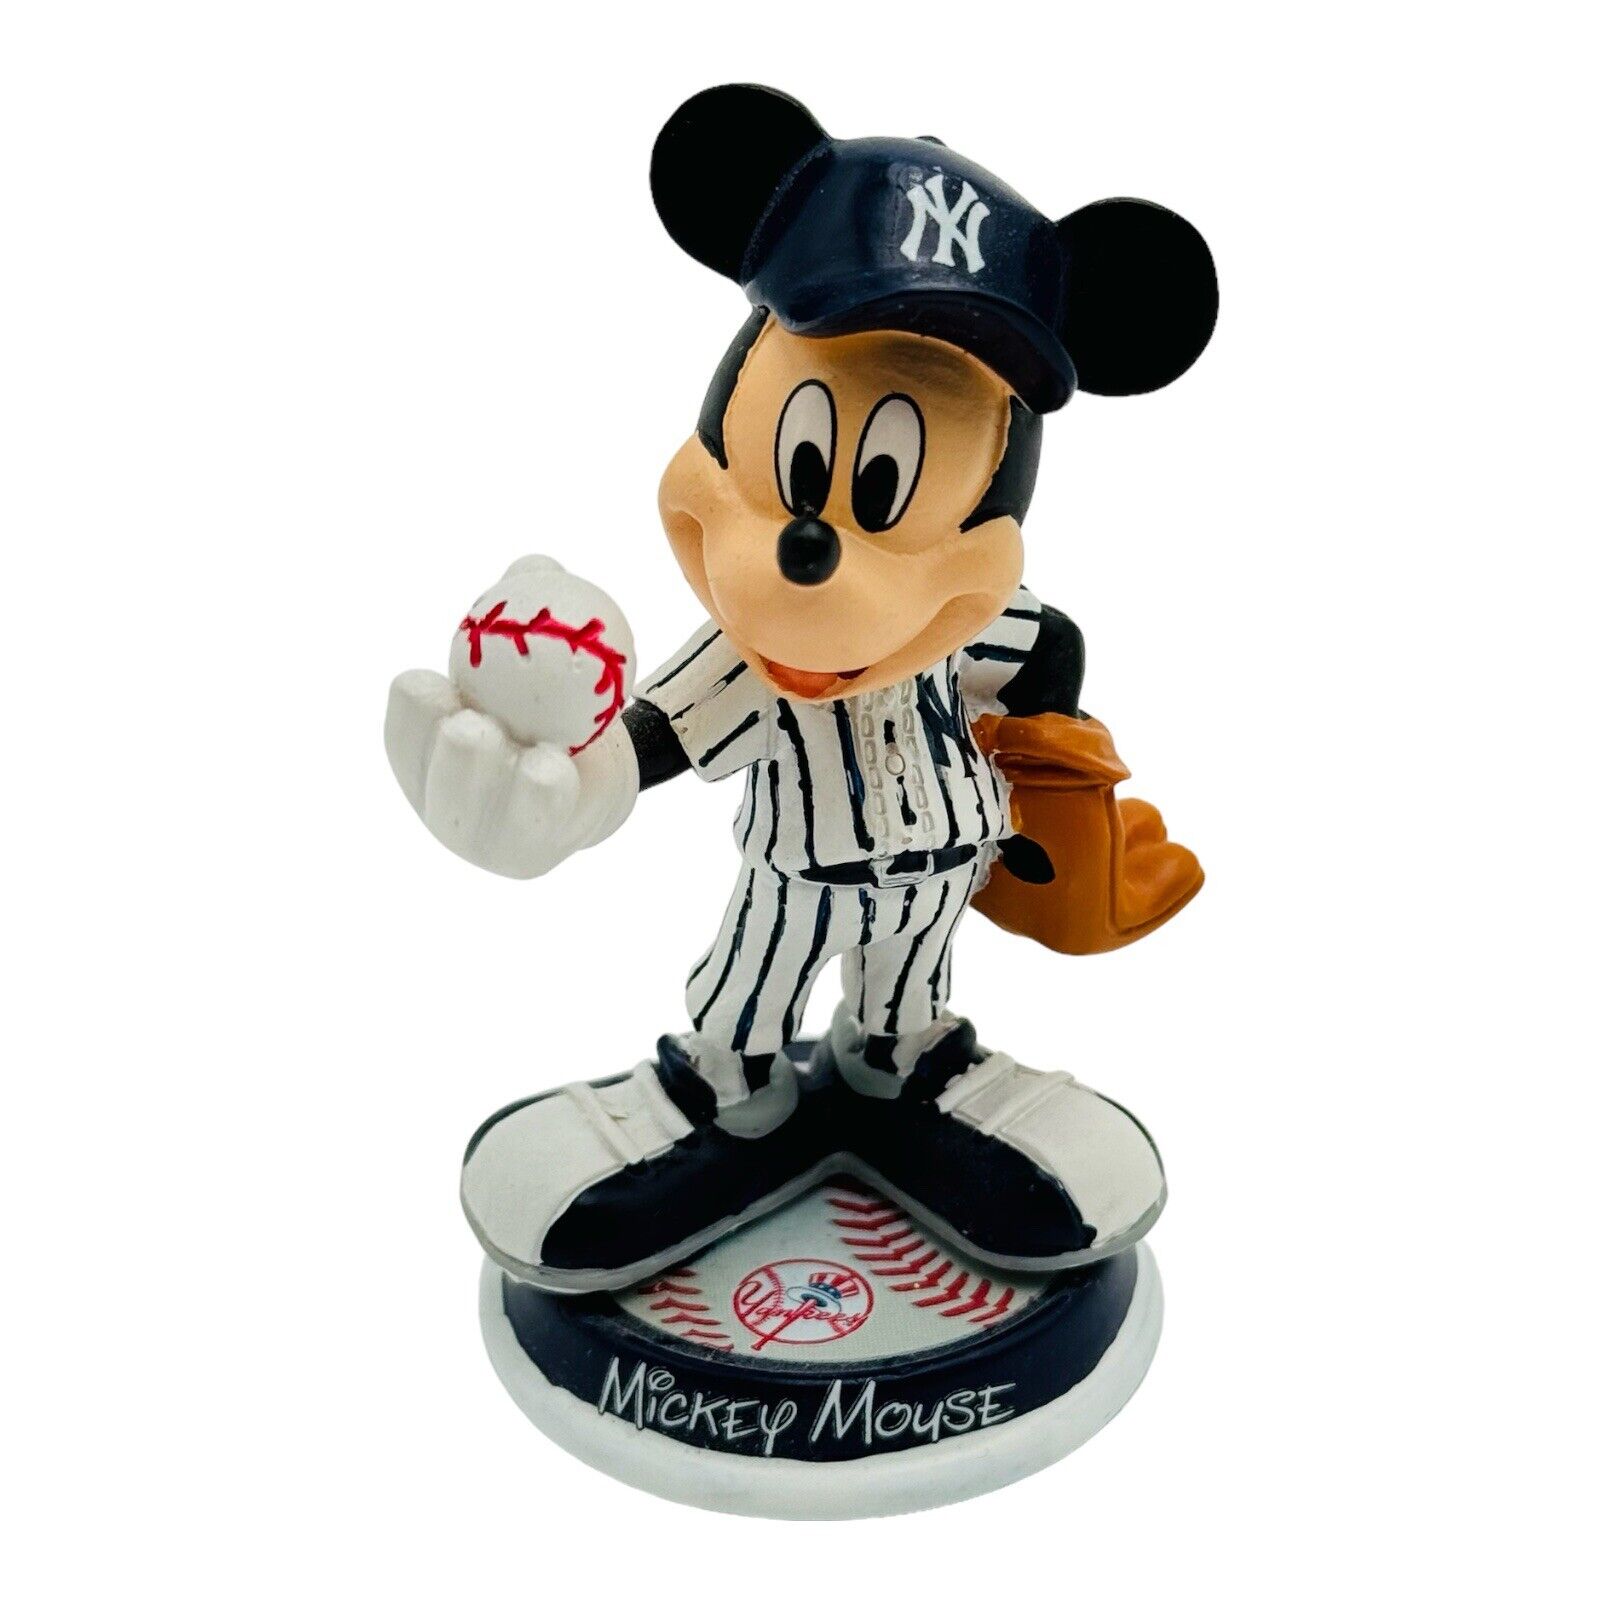 Disney Mickey Mouse Forever Collectibles MLB New York Yankees Figurine 2011 3”